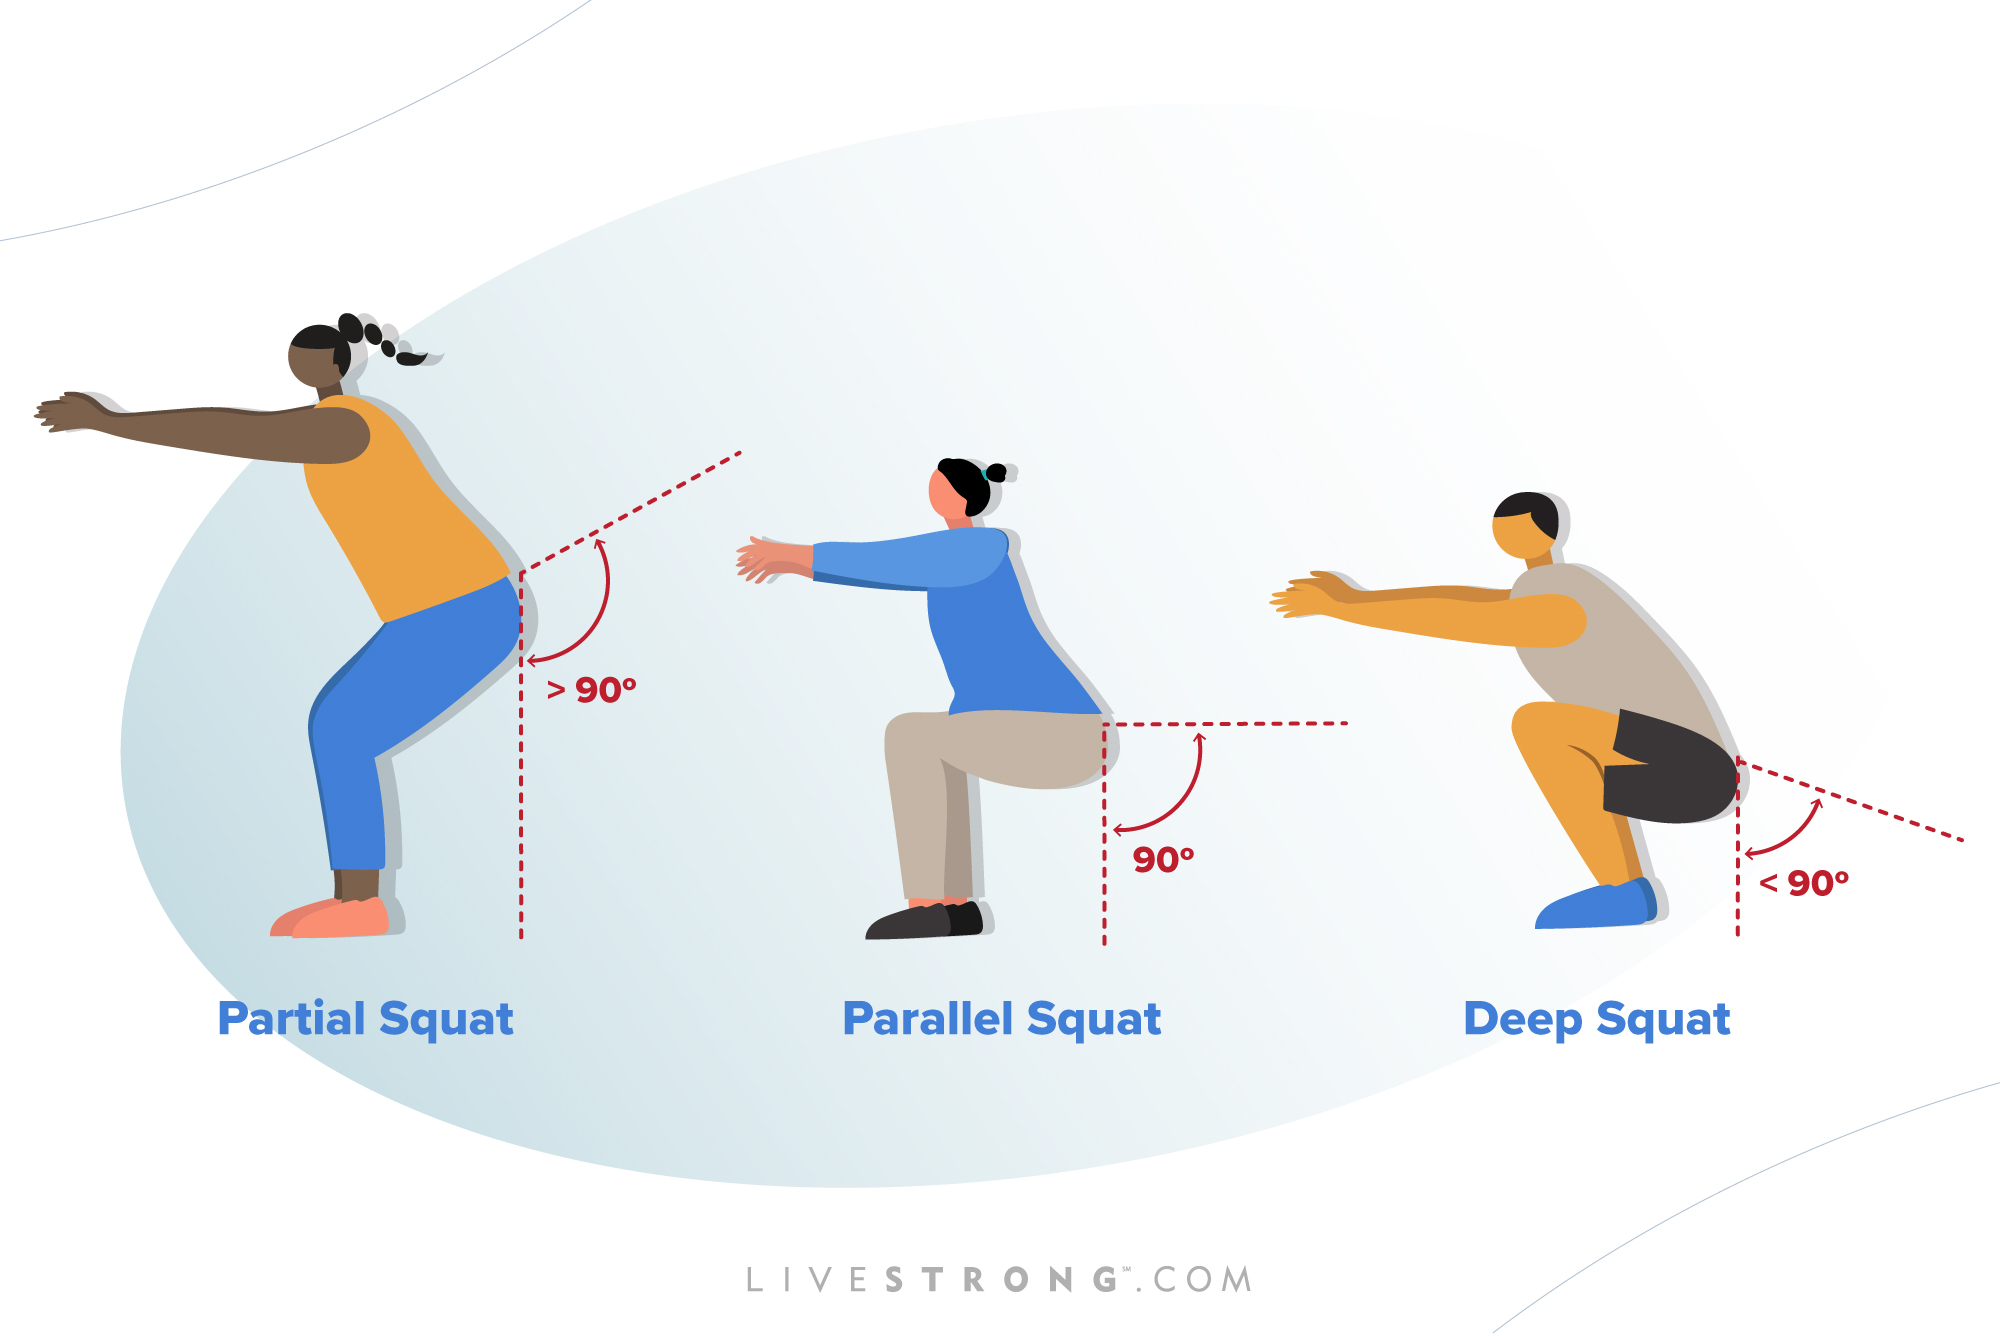 HOW TO WORK TOWARDS THE DEEP SQUAT — MOOV PERSONAL TRAINING